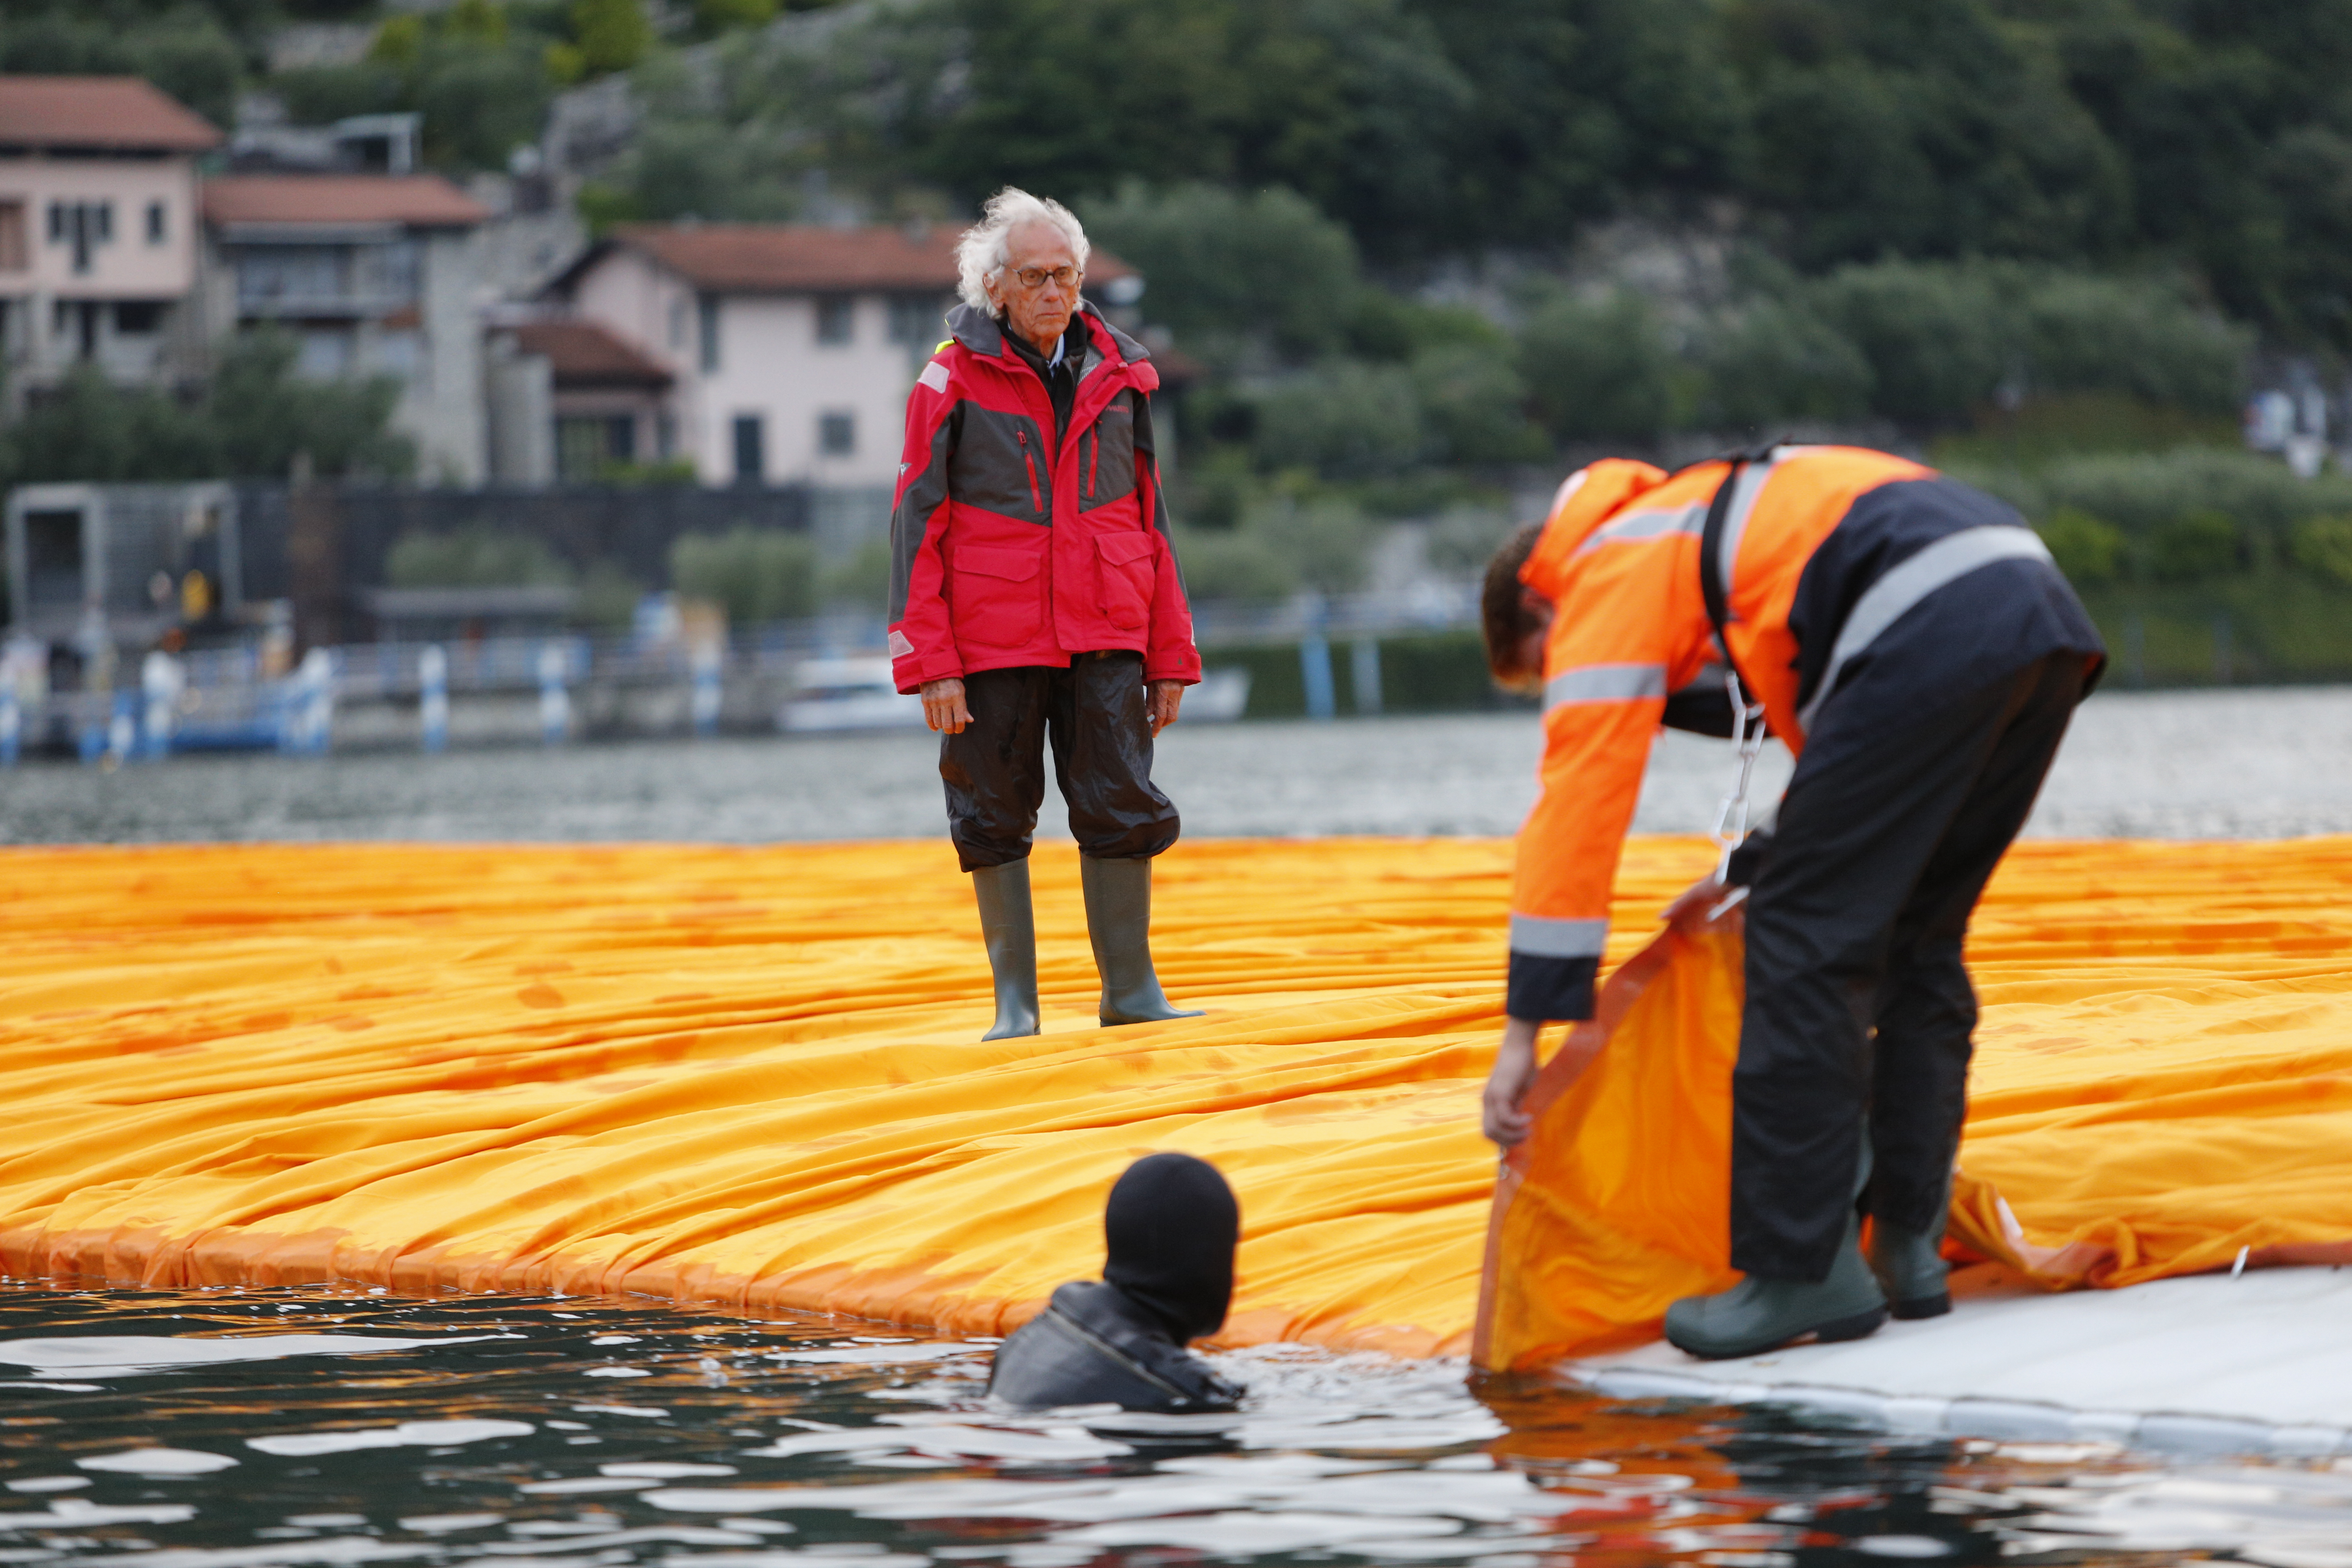 The floating Piers © 2016 Christo (Photo by Wolfgang Volz)